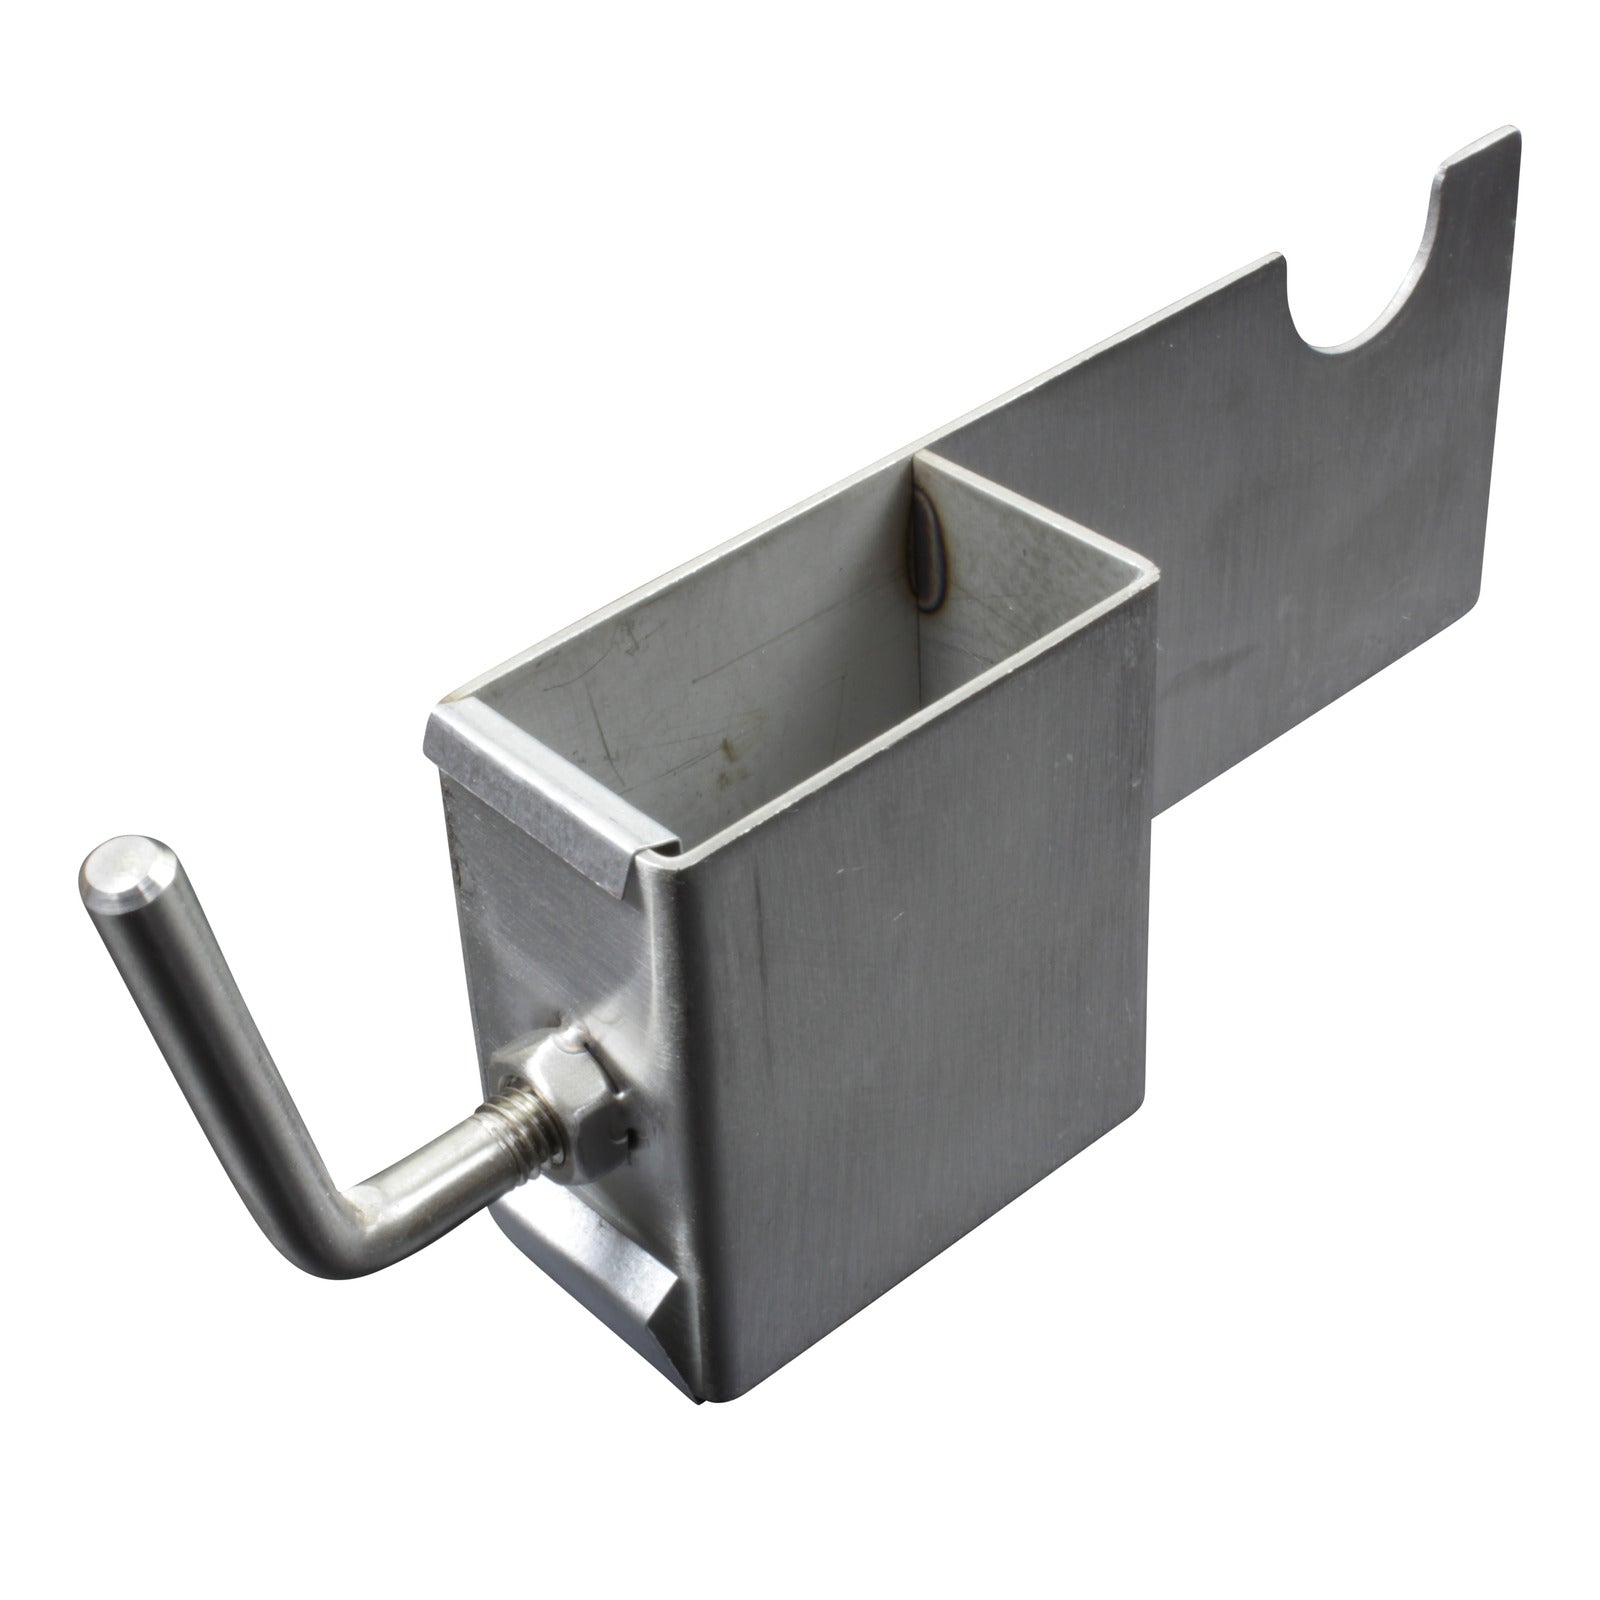 Right Skewer Support Bracket Stainless Steel Suit 40kg Motor from The BBQ Store - SSB-6004R